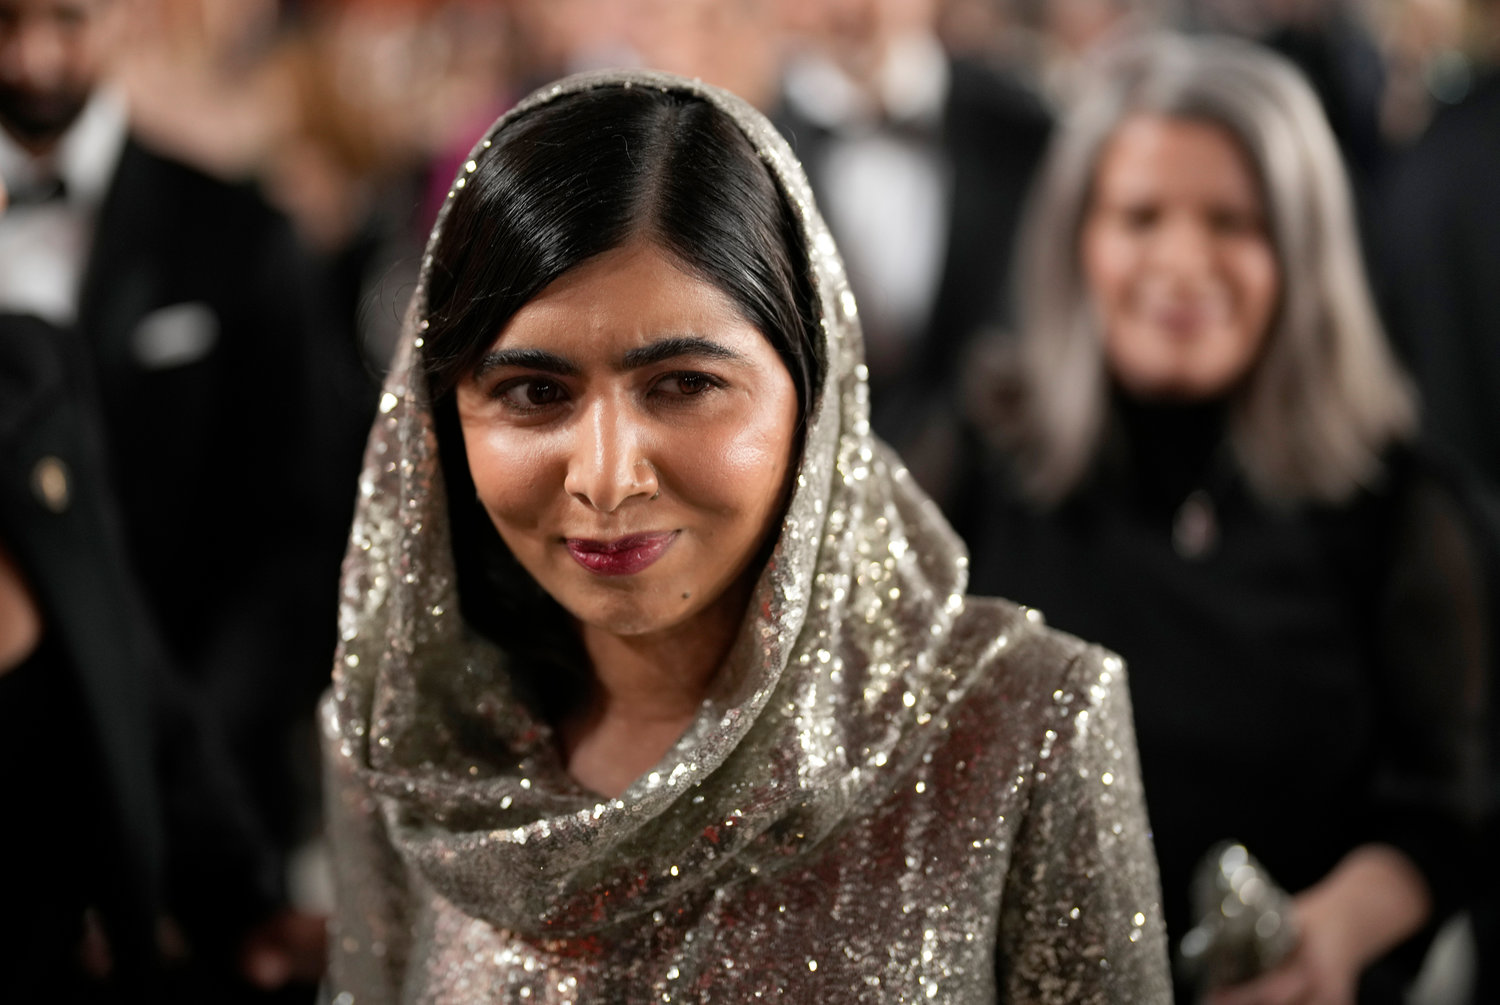 Malala Yousafzai arrives at the Oscars on Sunday, March 12, 2023, at the Dolby Theatre in Los Angeles. (AP Photo/John Locher)